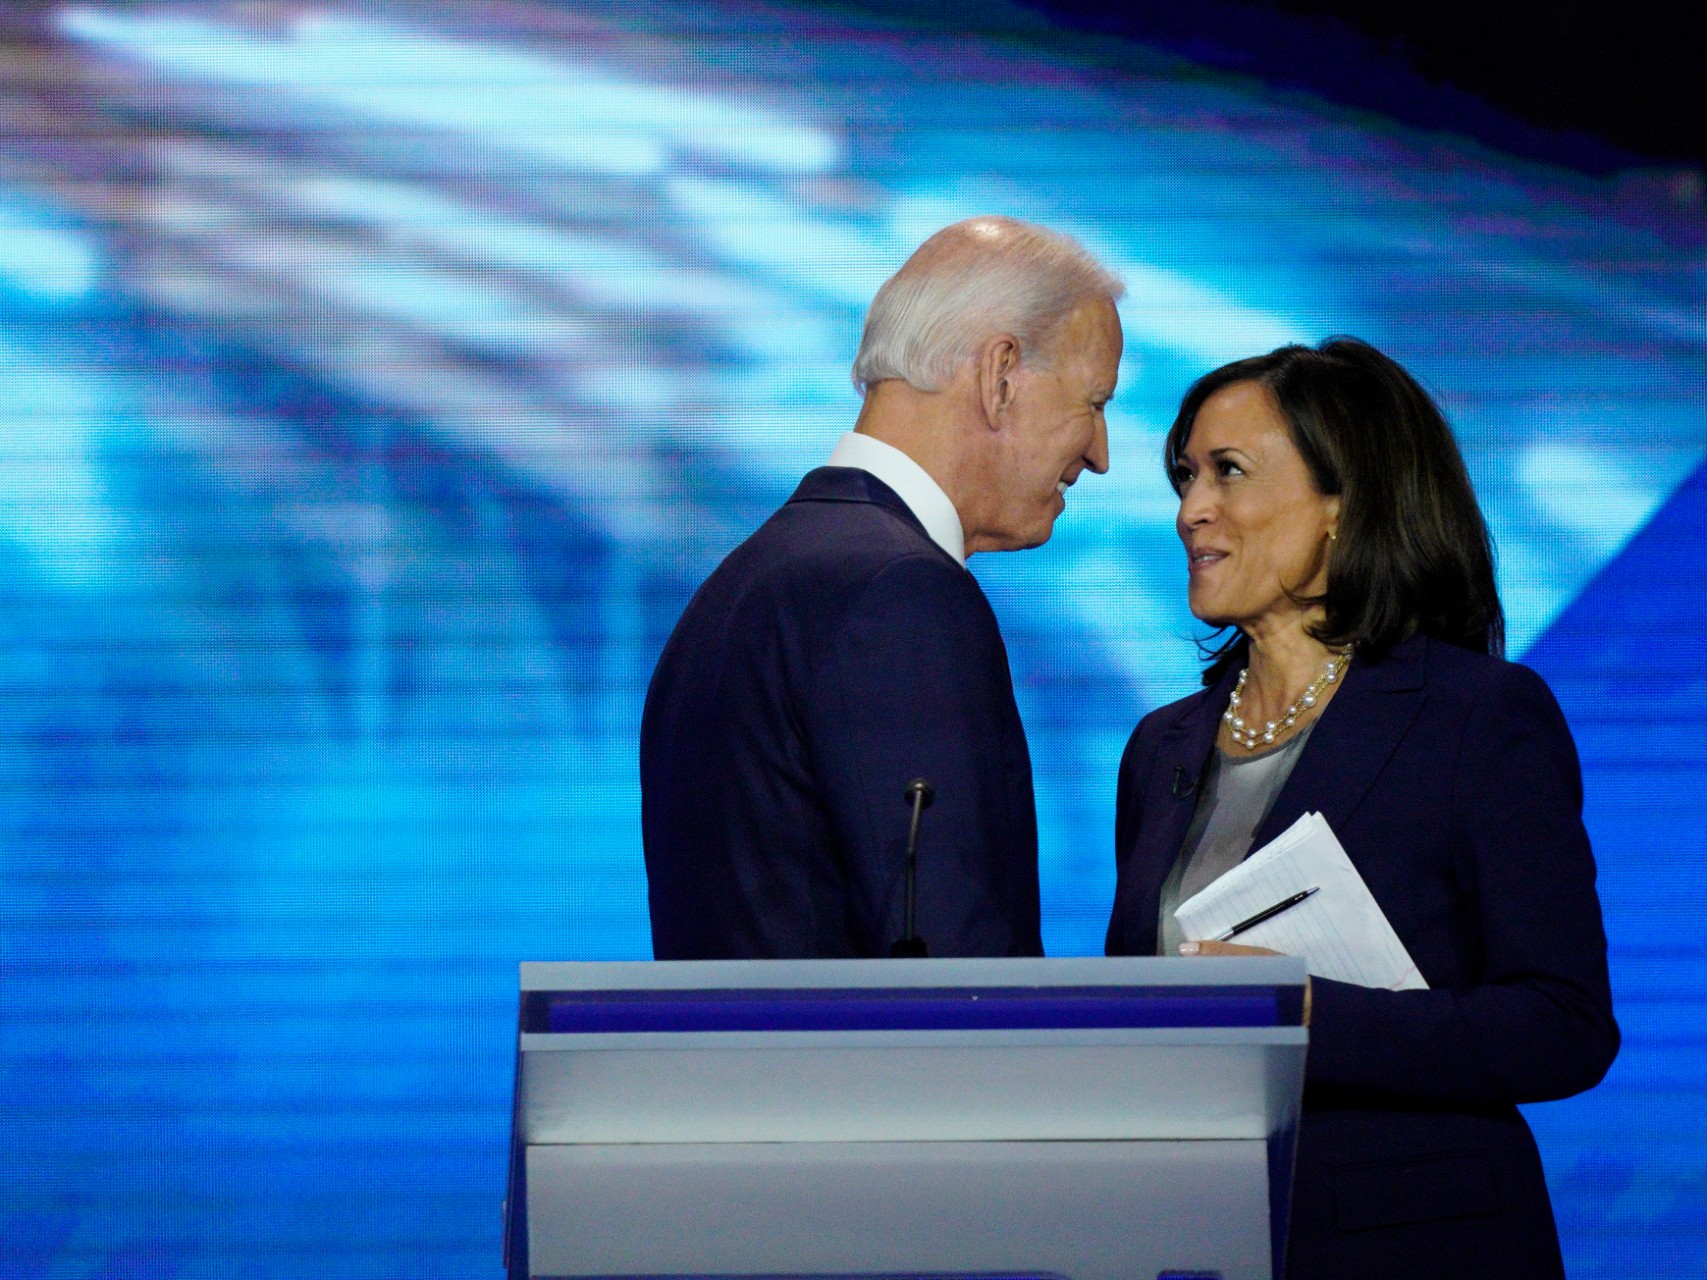 Mary Japanese Mom Forced To Do Sex With Son S Friend - Kamala Harris Named Democratic Vice Presidential Candidate, What It Means  For 2020 Election - capradio.org